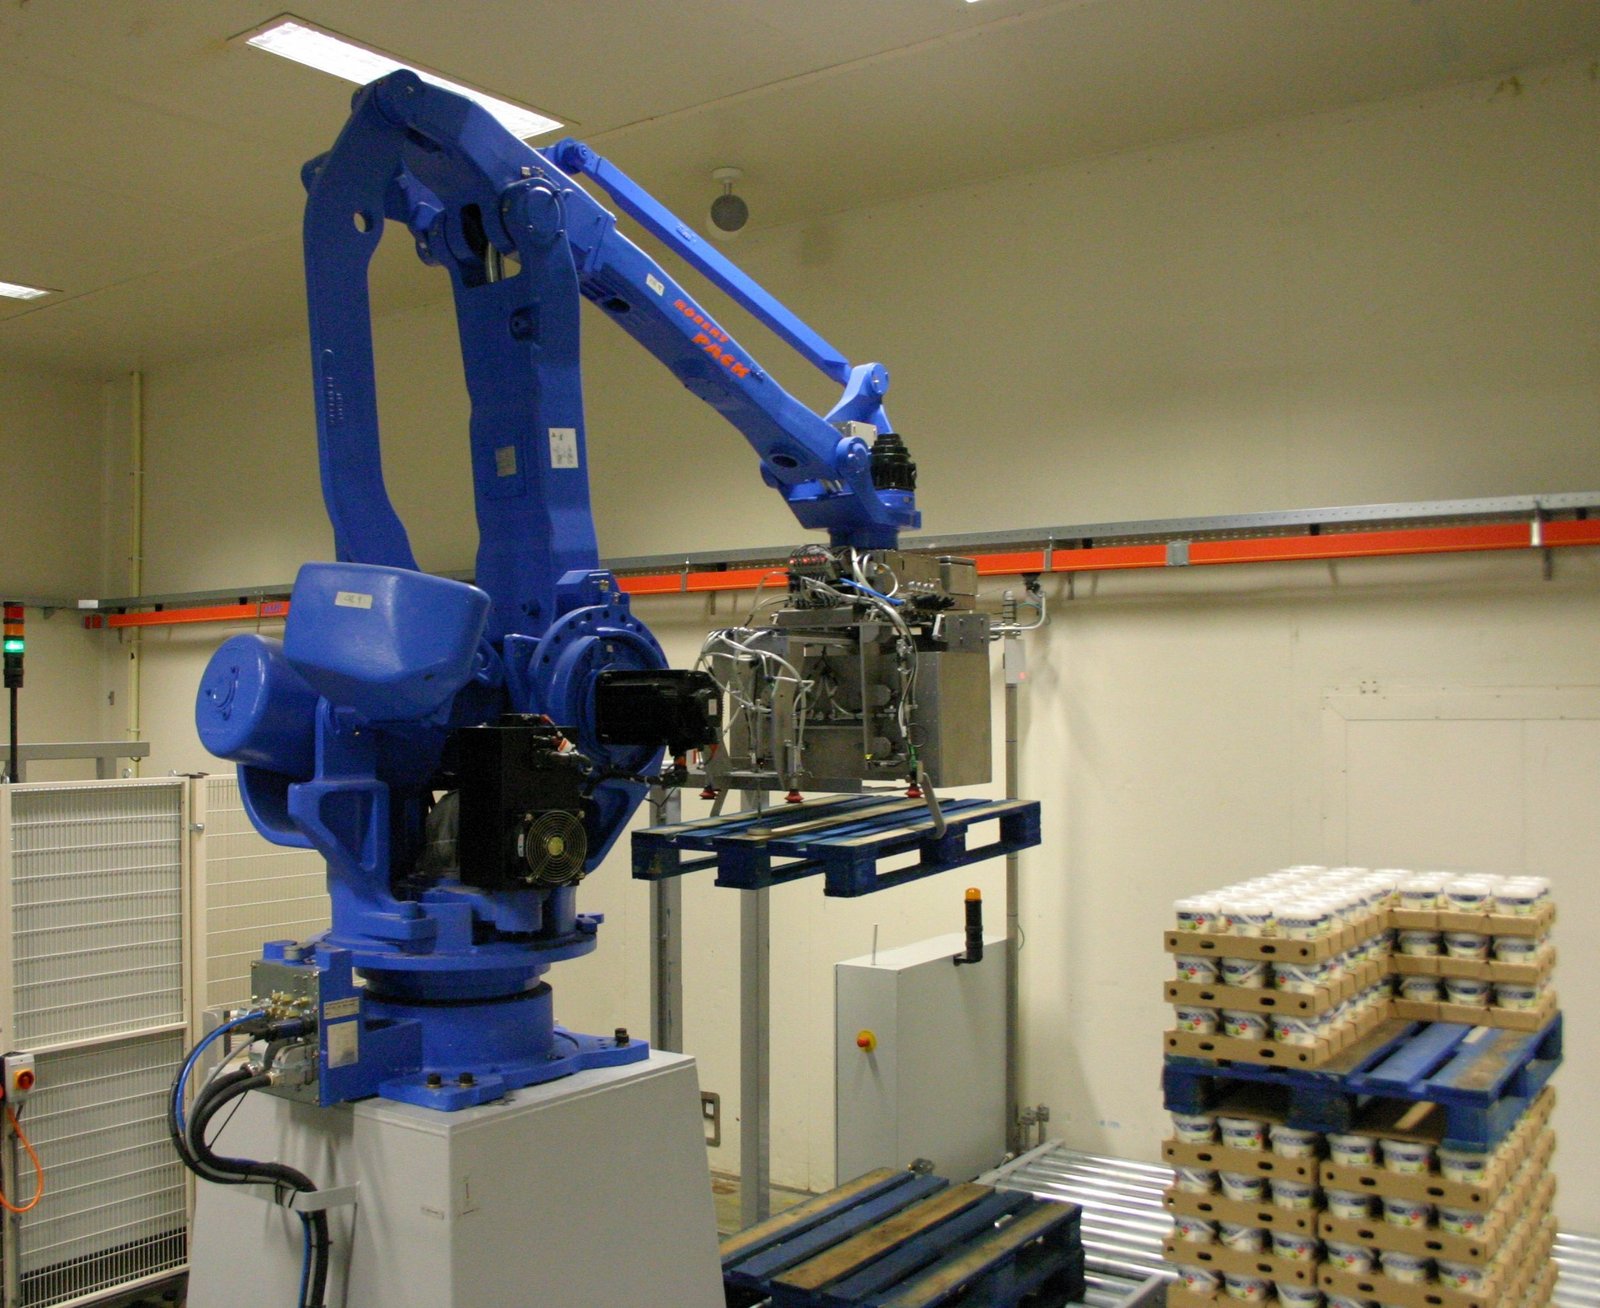 Yaskawa-robot-for-palletising-trays-with-desserts-Zuivelhoeve